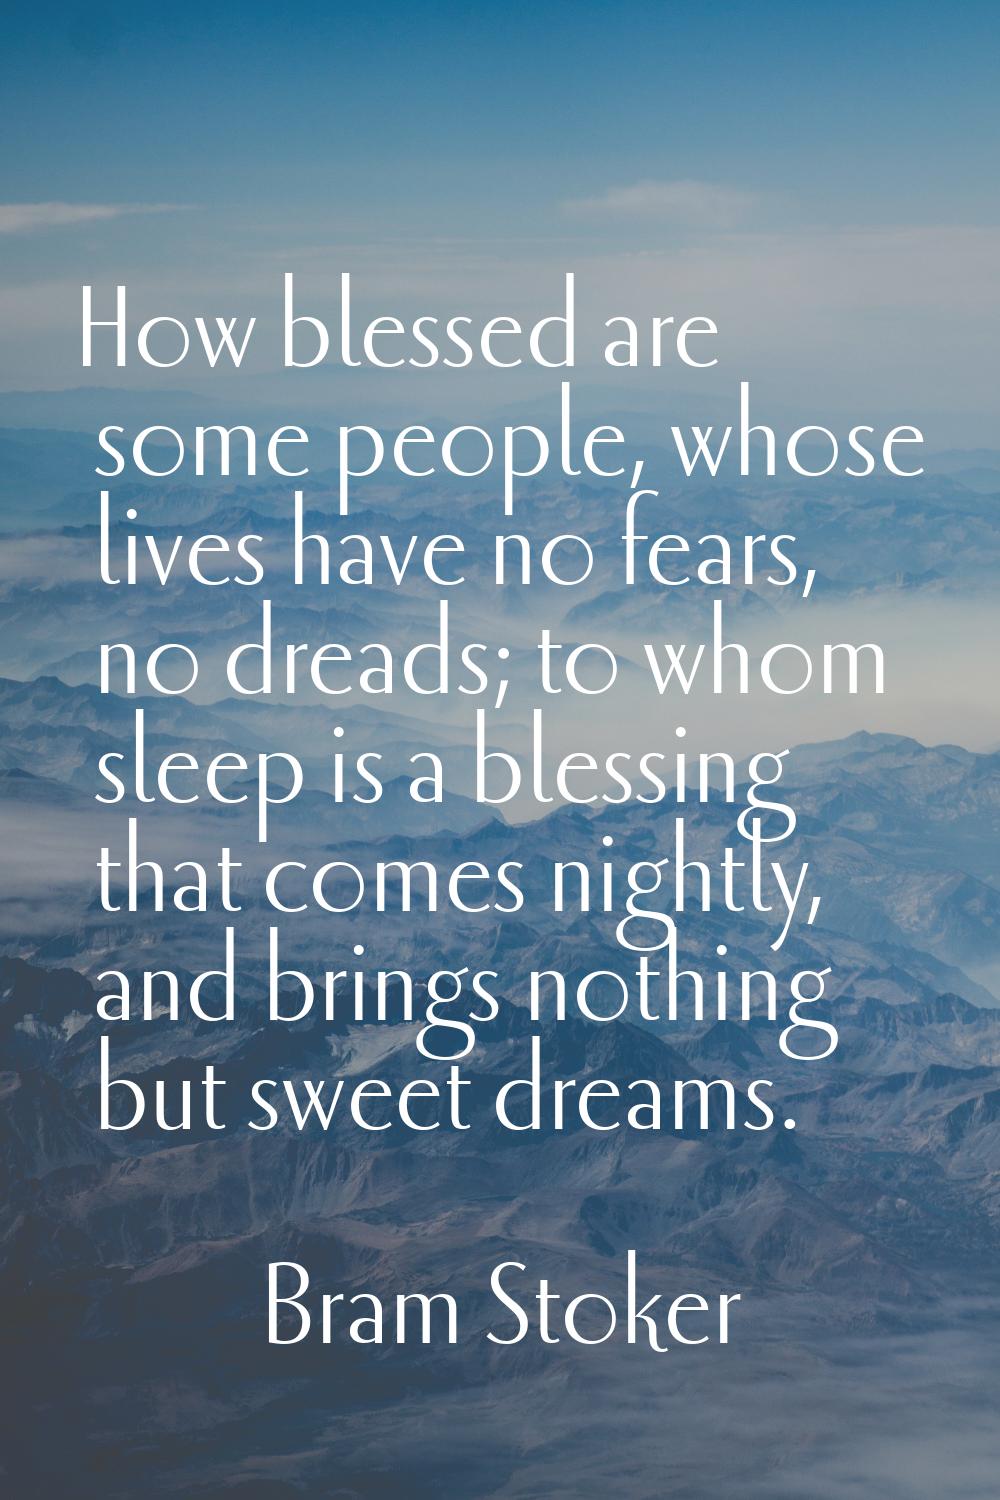 How blessed are some people, whose lives have no fears, no dreads; to whom sleep is a blessing that